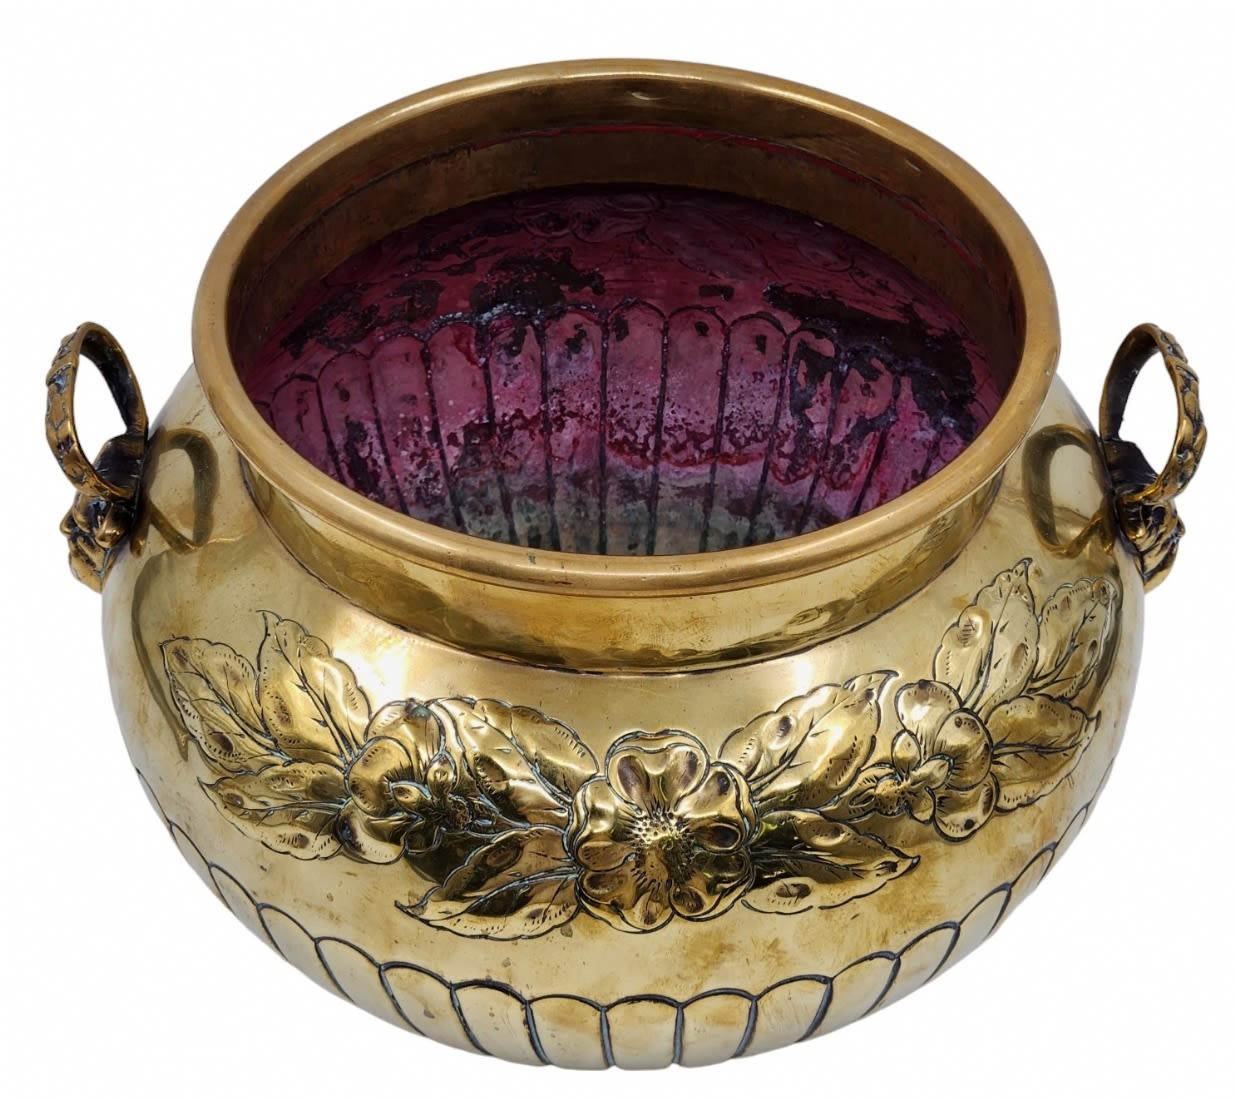 Pot (Jardiniere) , antique, English, from the 19th century (Victorian), made of brass, Width - Image 3 of 5